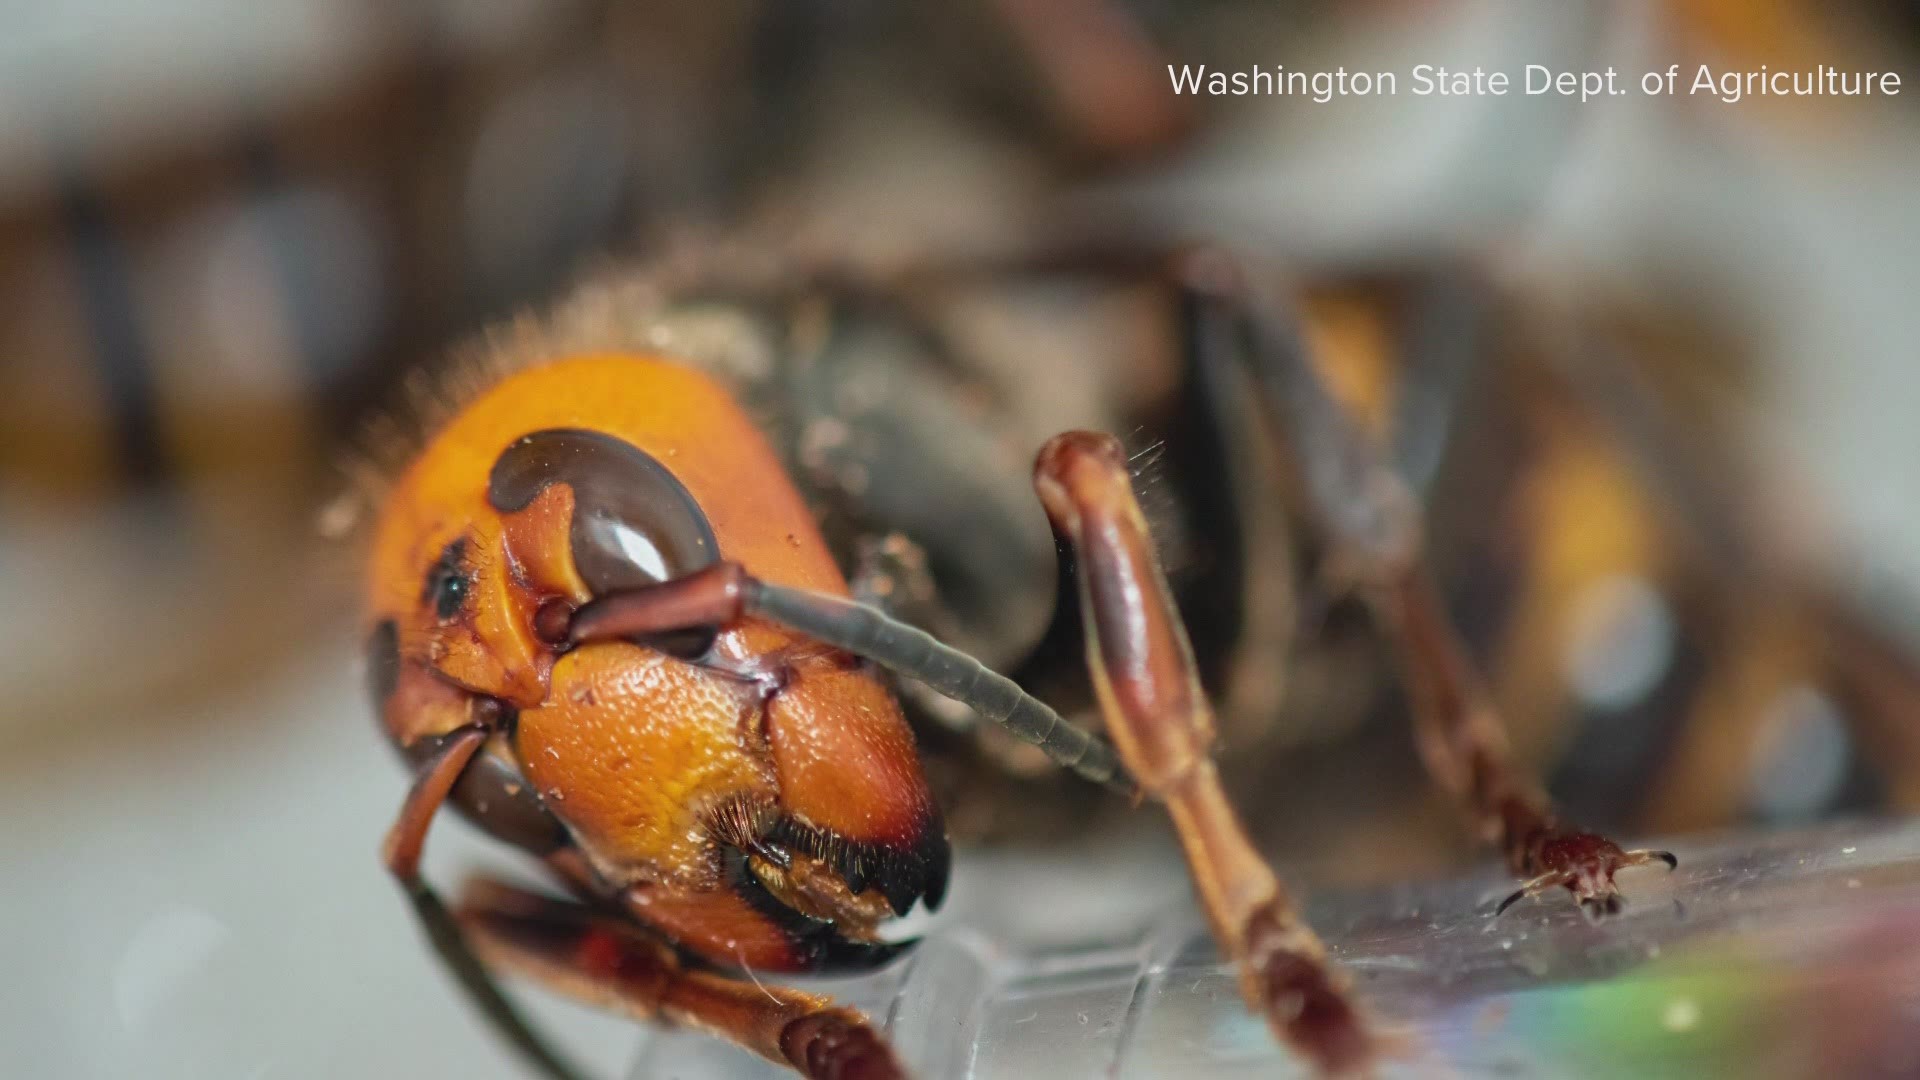 As the Asian giant hornet trapping season approaches, entomologists in Washington state and British Columbia are collaborating to eradicate the invasive species.